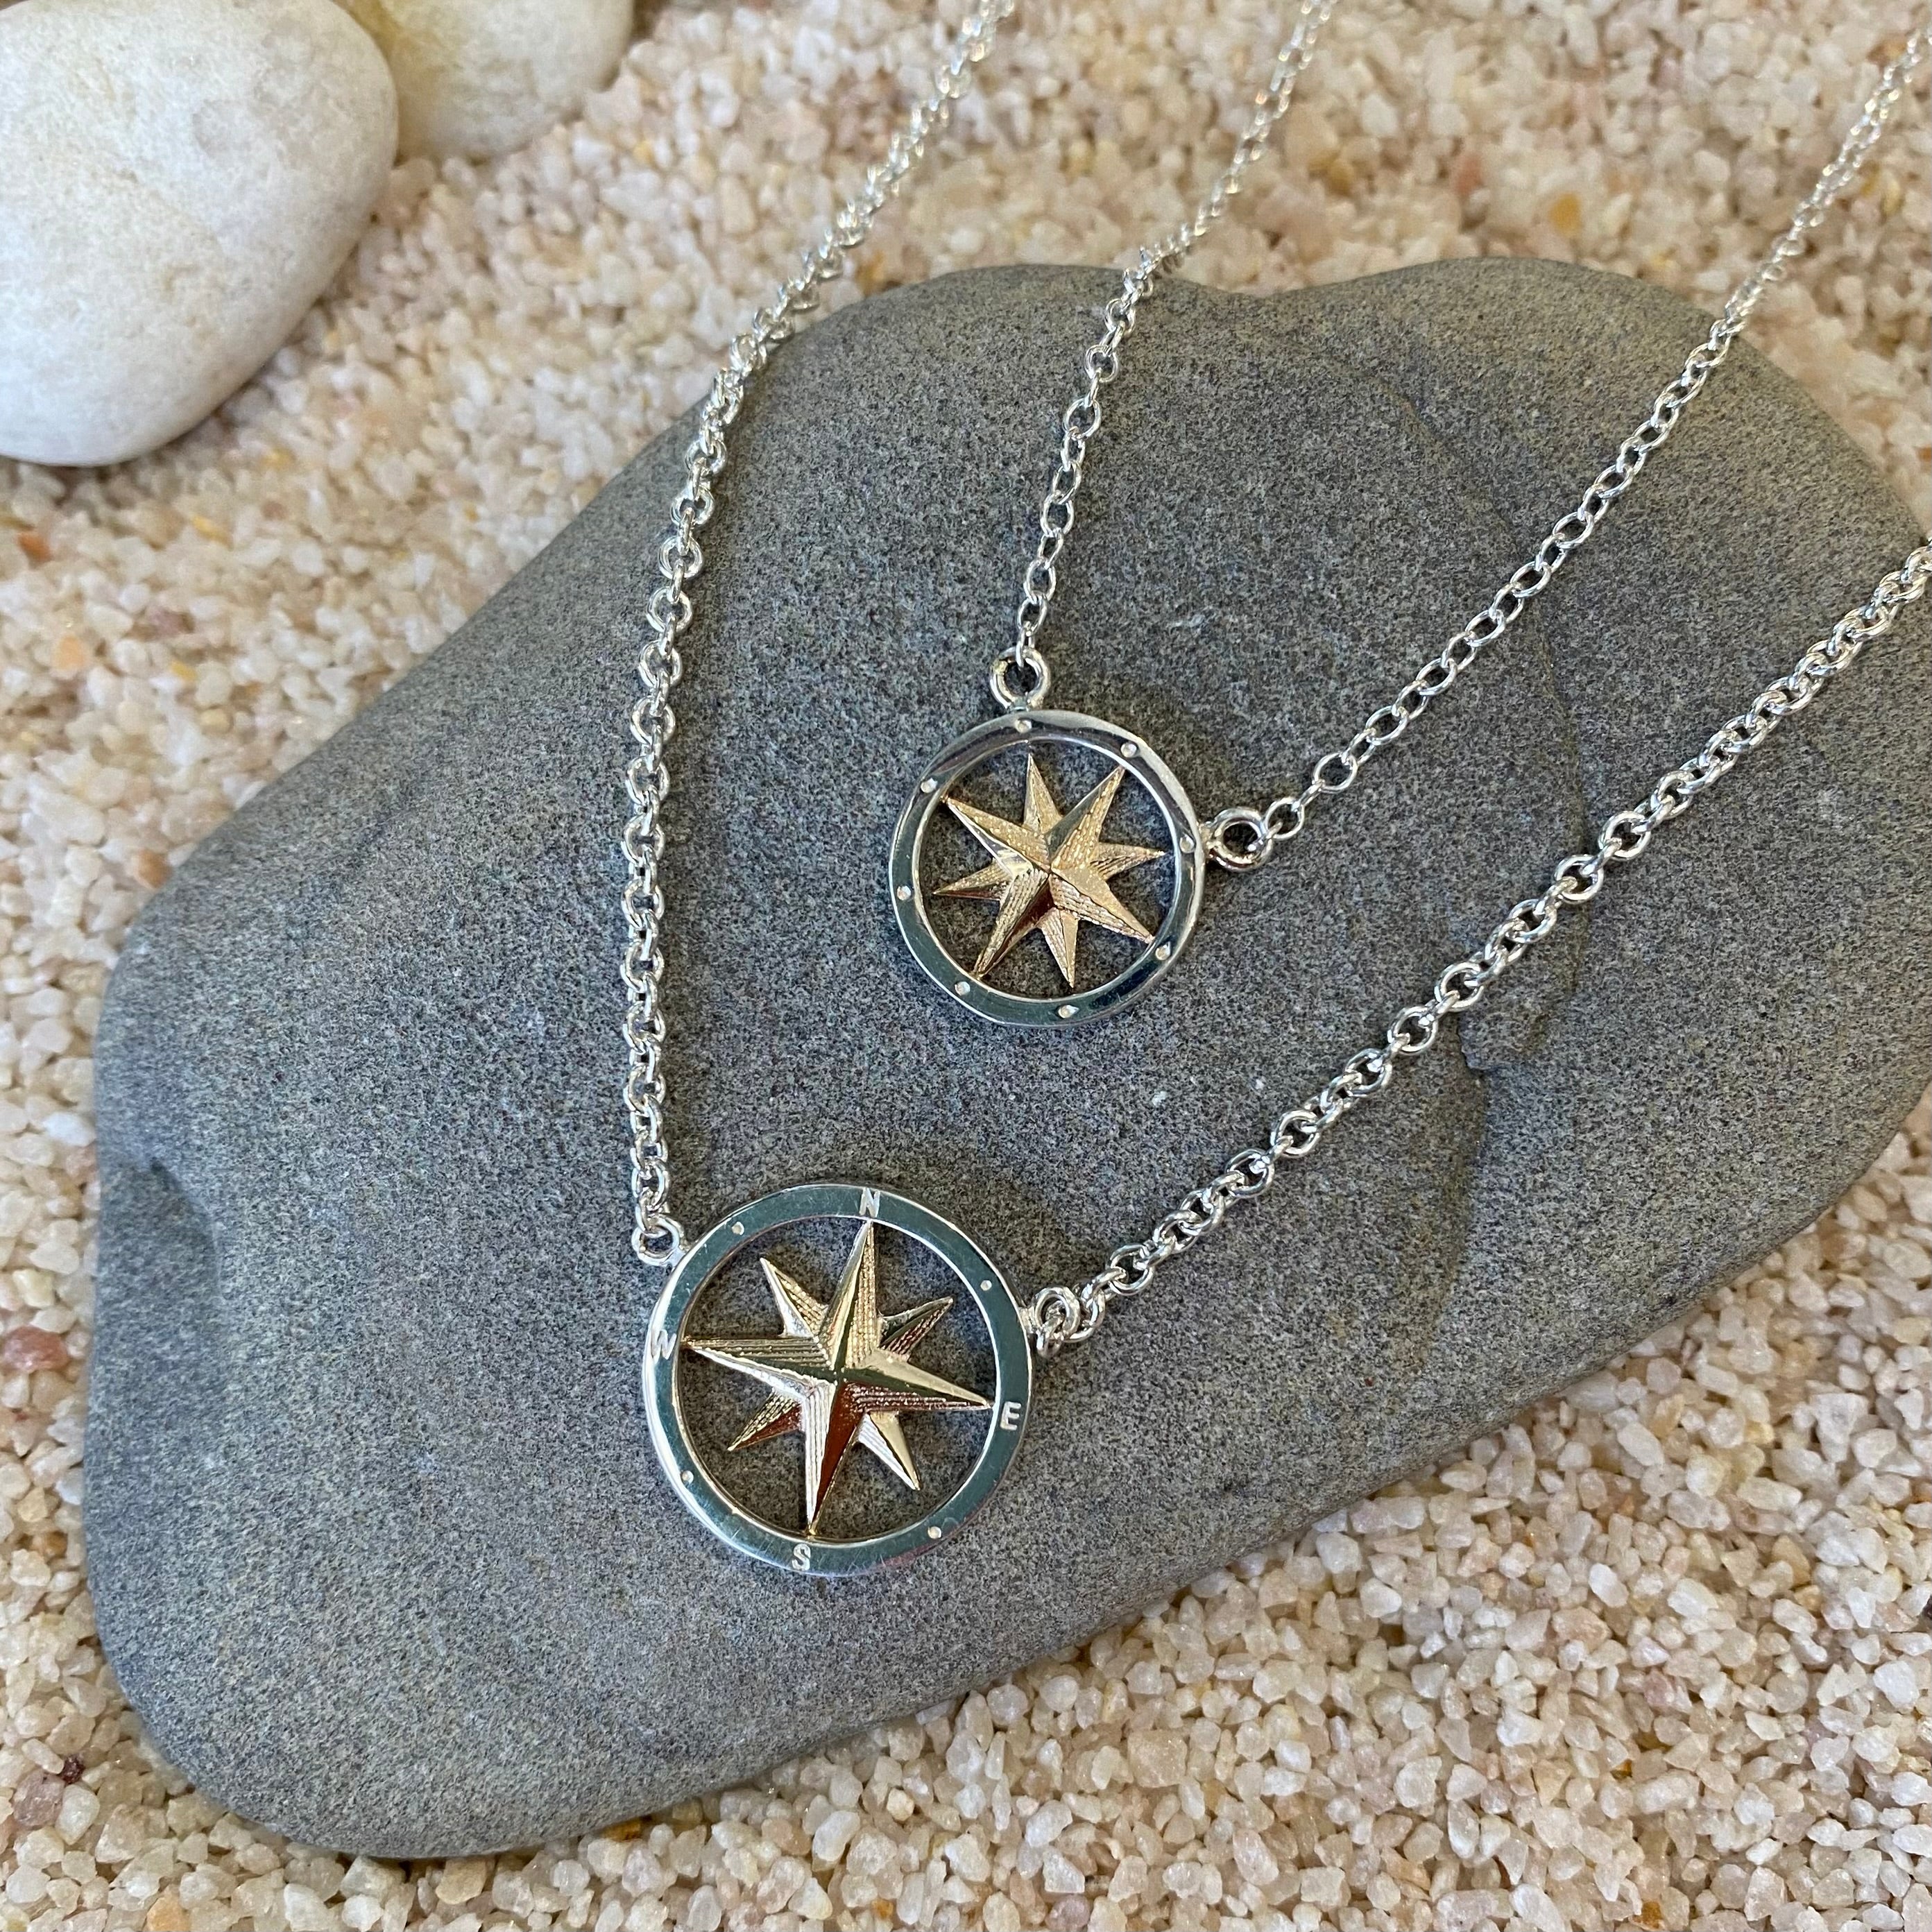 Kaia Initial Compass Necklace in 18K Gold Plating - MYKA